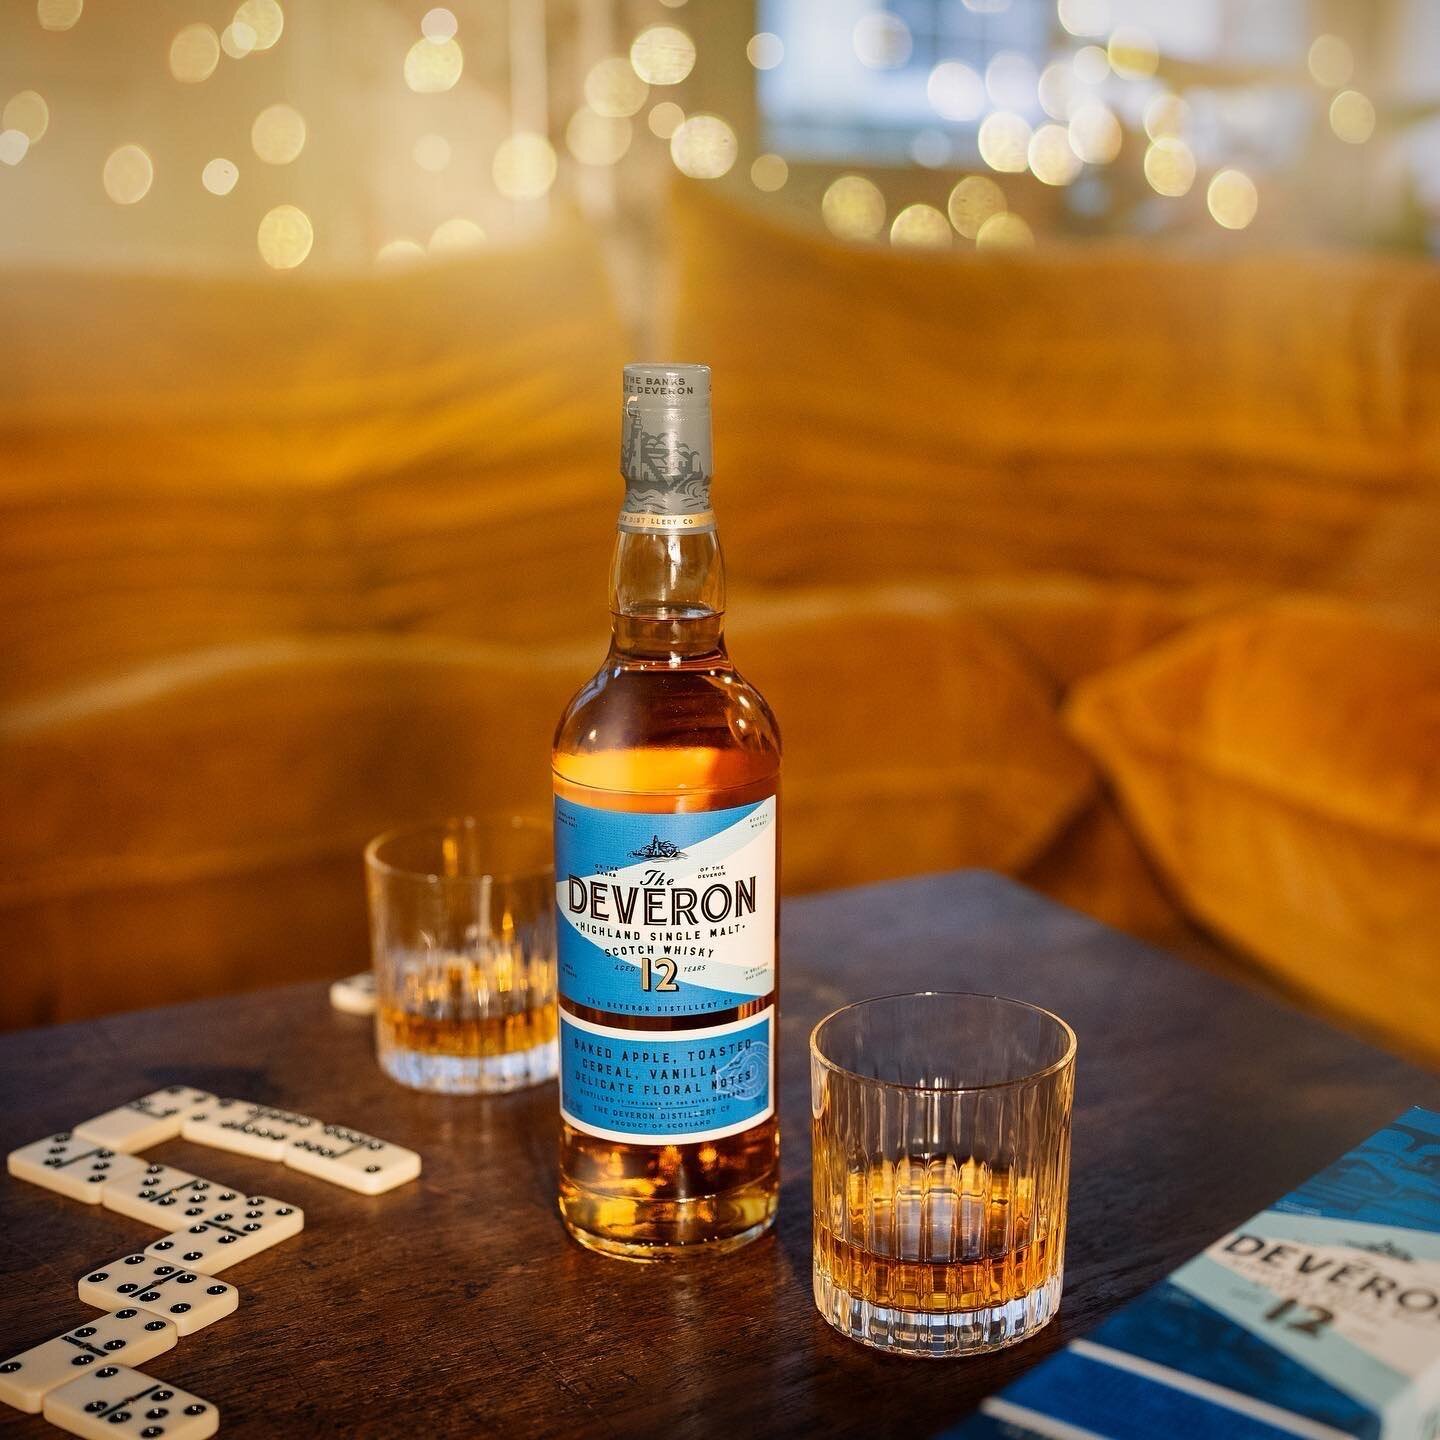 Shot for @thedeveronwhisky 

#SingleMaltWhisky #TheDeveron